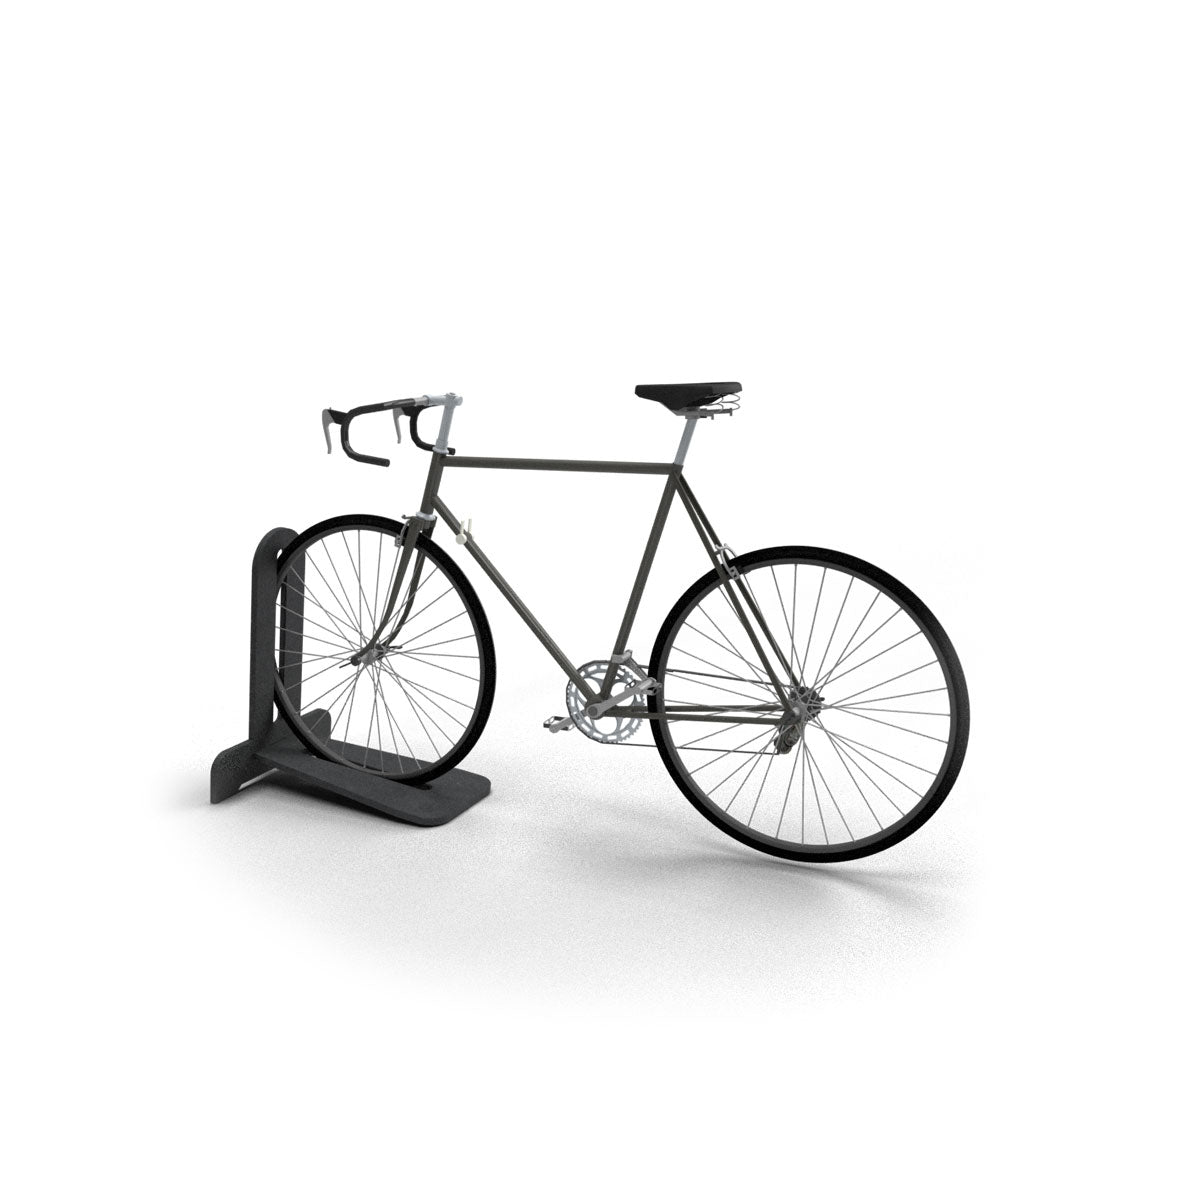 BIKE STAND CDF MOBILE ROAD - RIDERS GONNA RIDE®